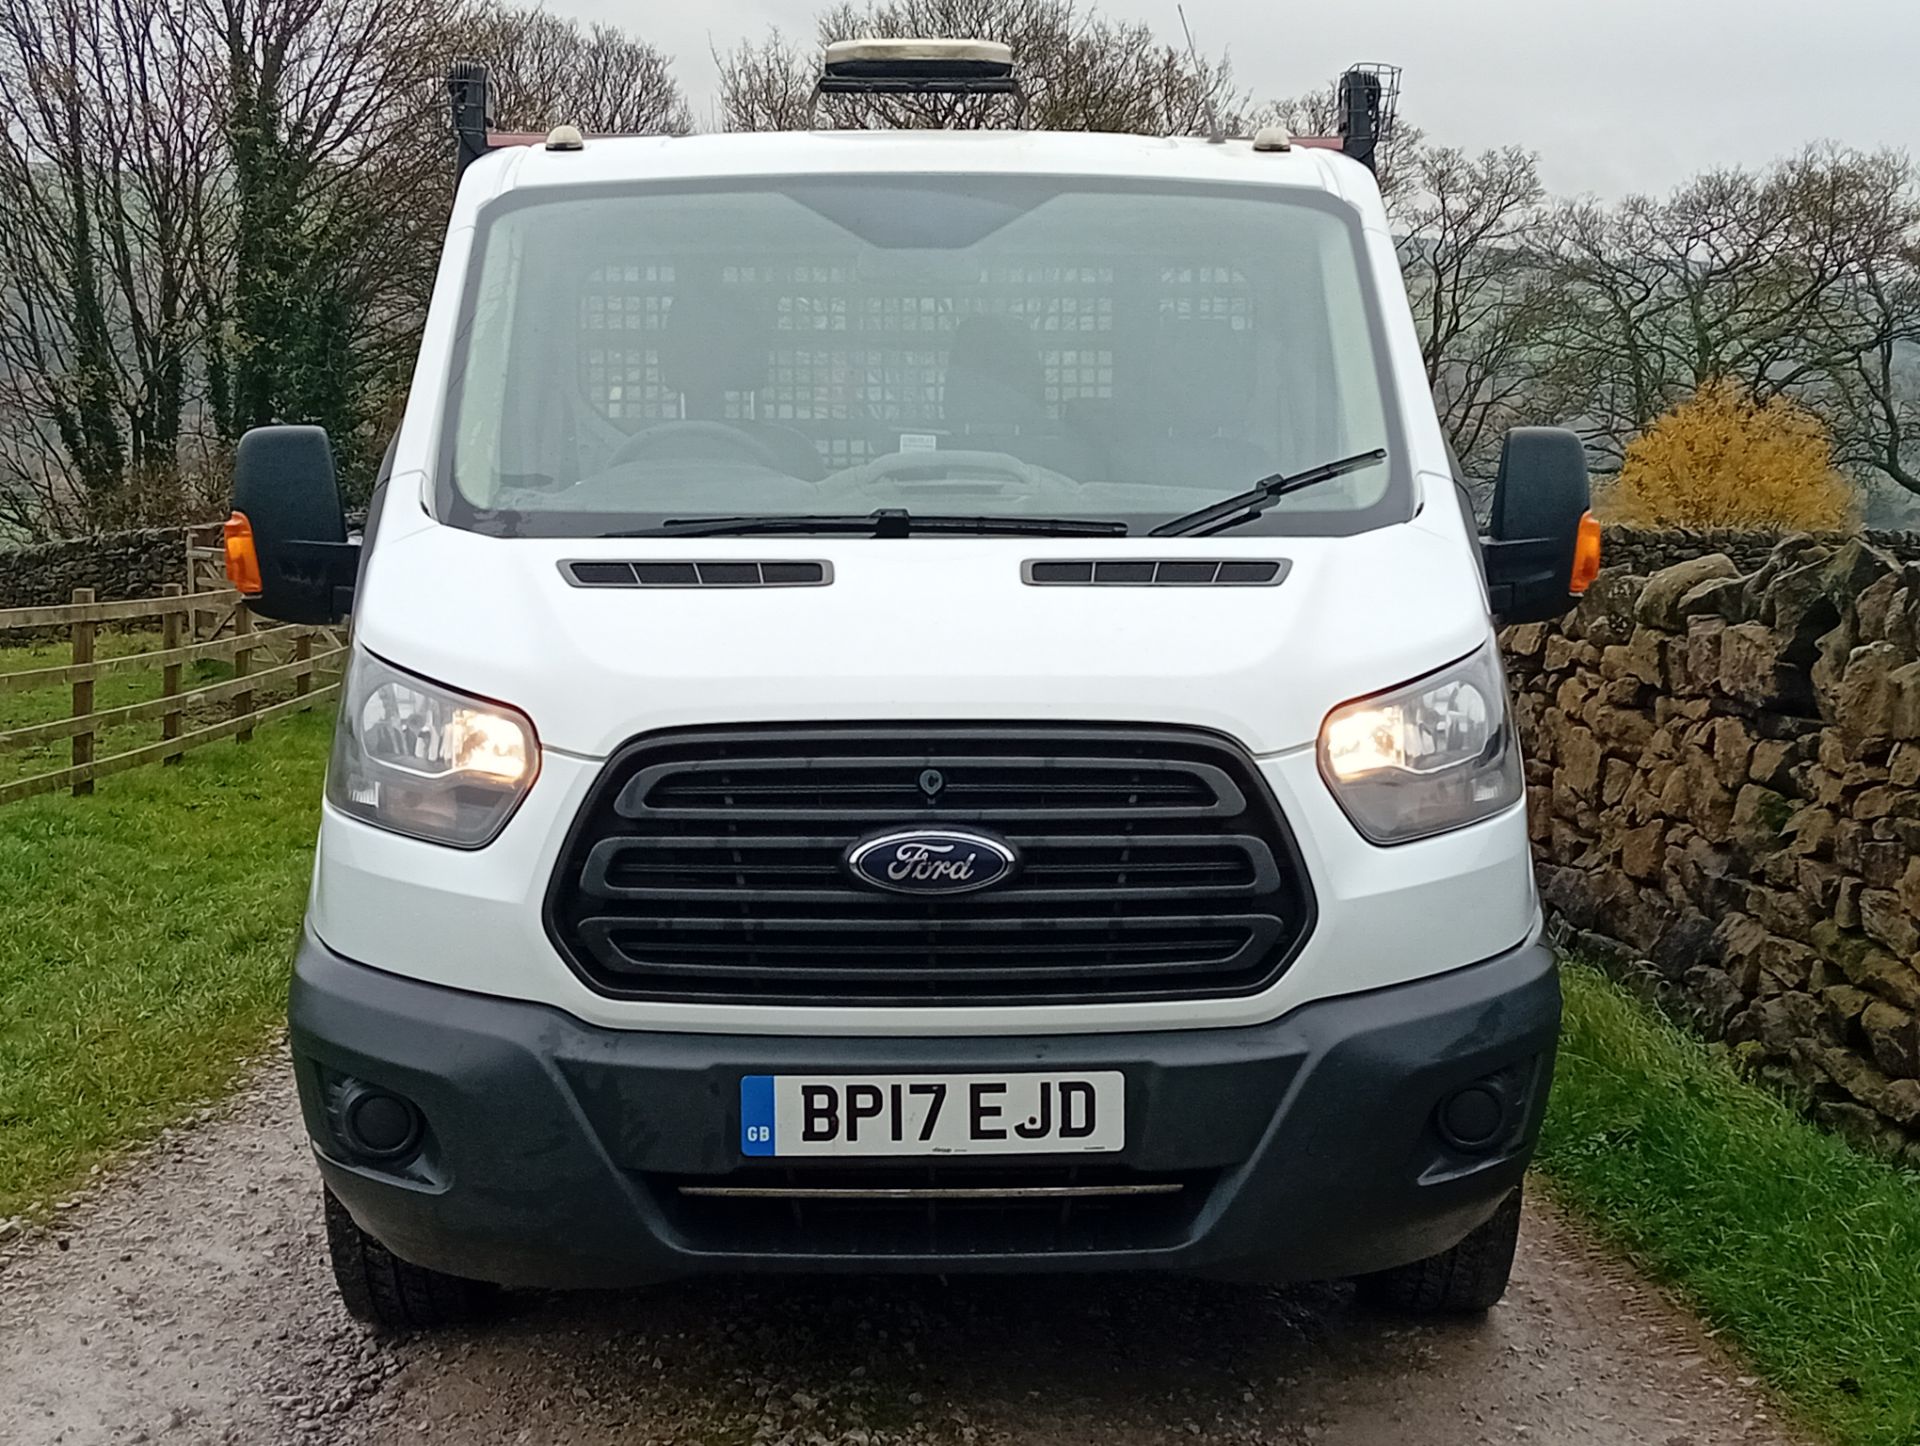 2017 FORD TRANSIT 2.0 ECOBLUE DROPSIDE - 159,000 MILES - EURO 6 - JUST SERVICED - TOW BAR. - Image 3 of 8